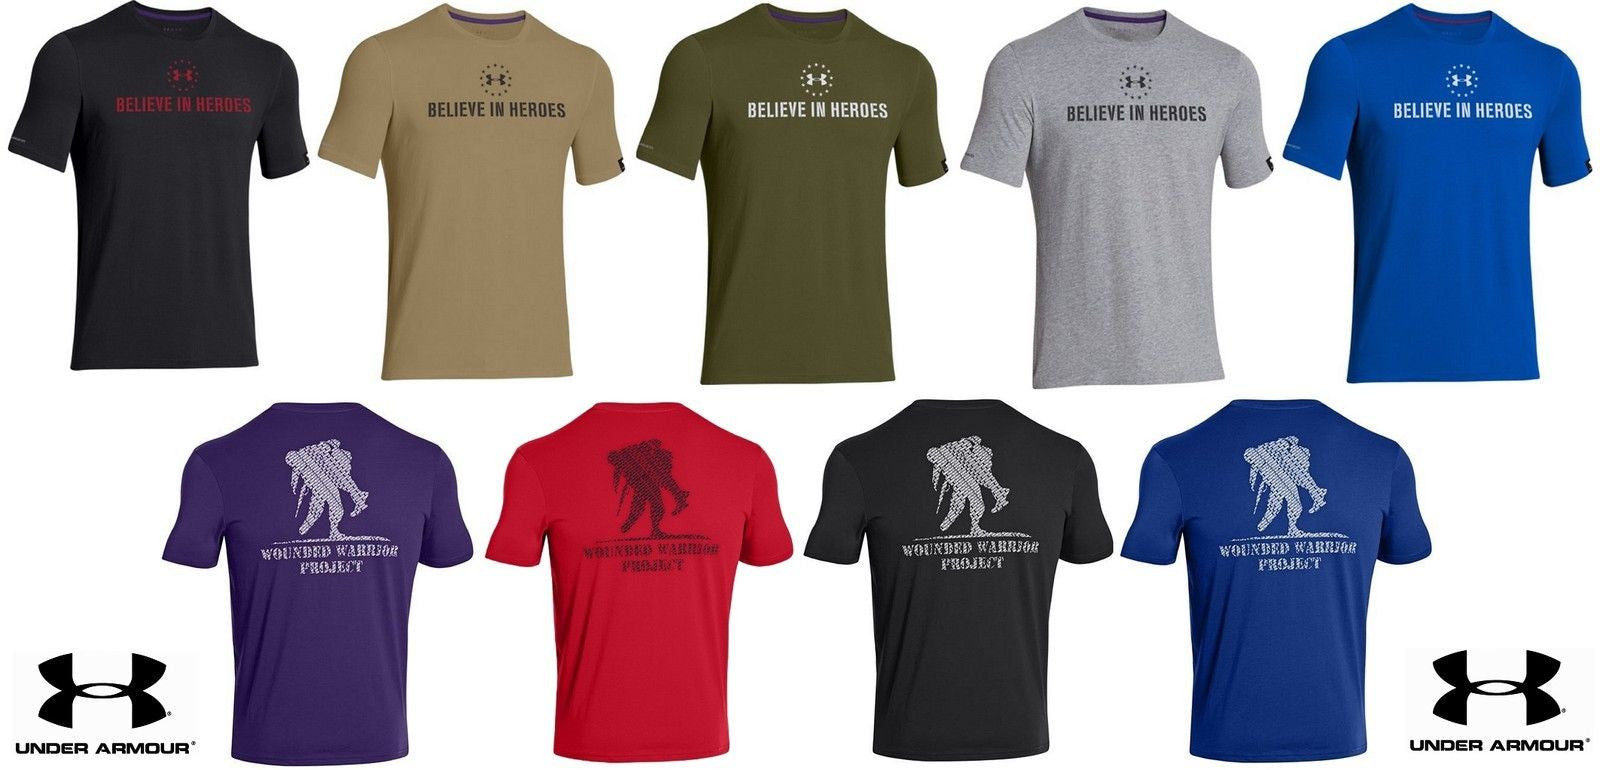 under armor wounded warrior clothing